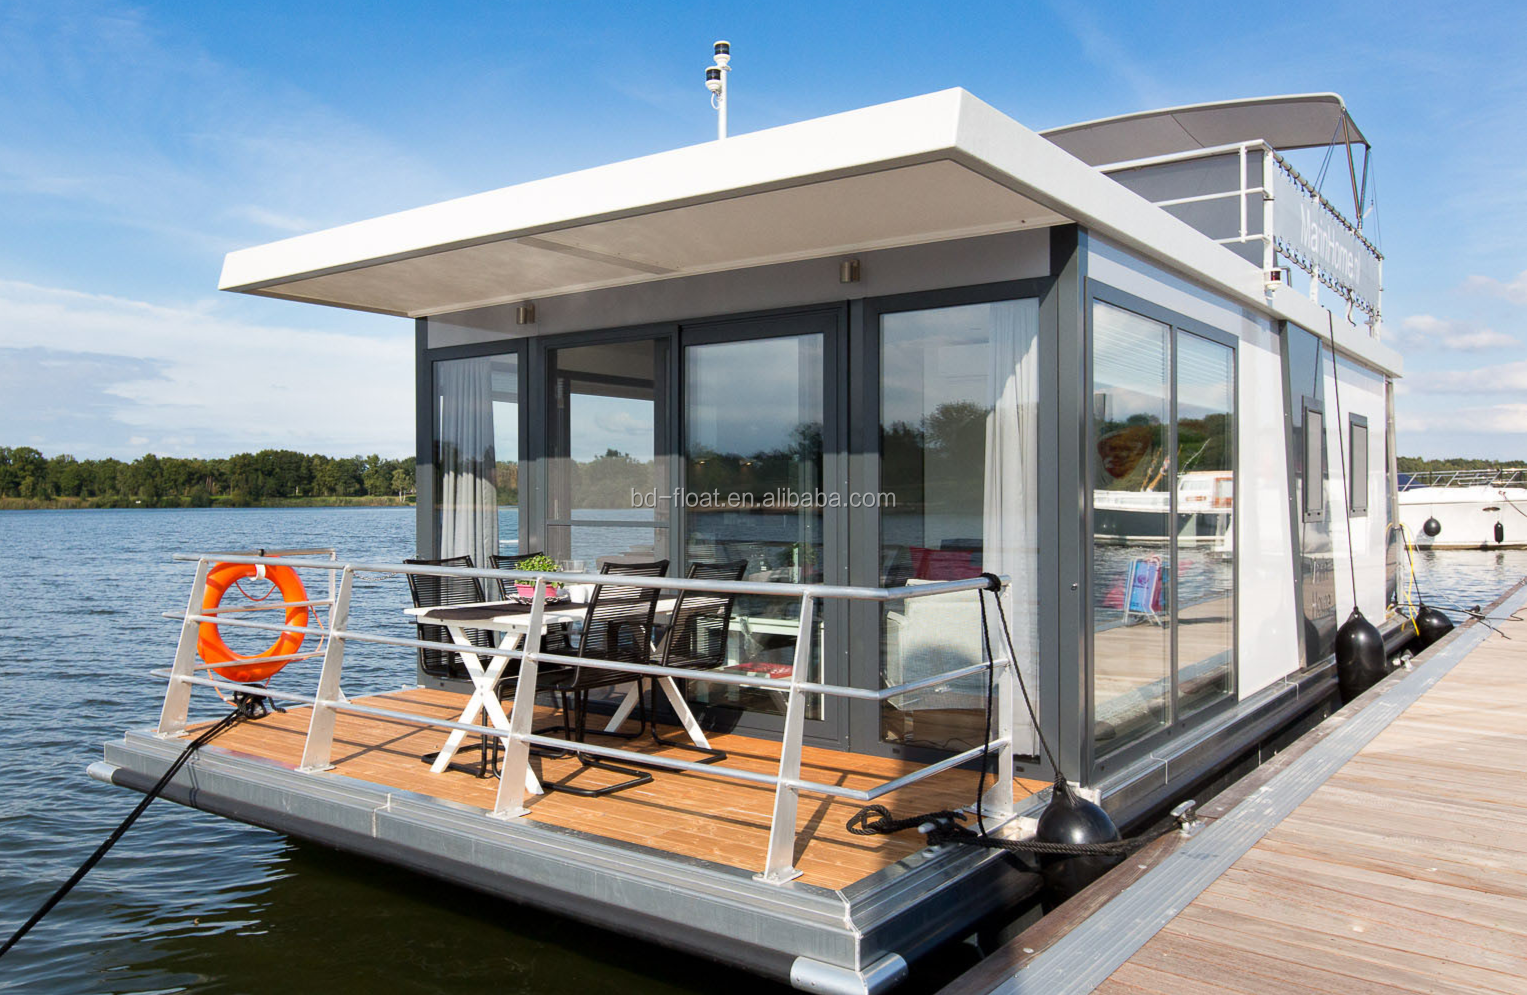 What are the different ways to find a houseboat owner for Houseboat Cost negotiation or discussion? post thumbnail image